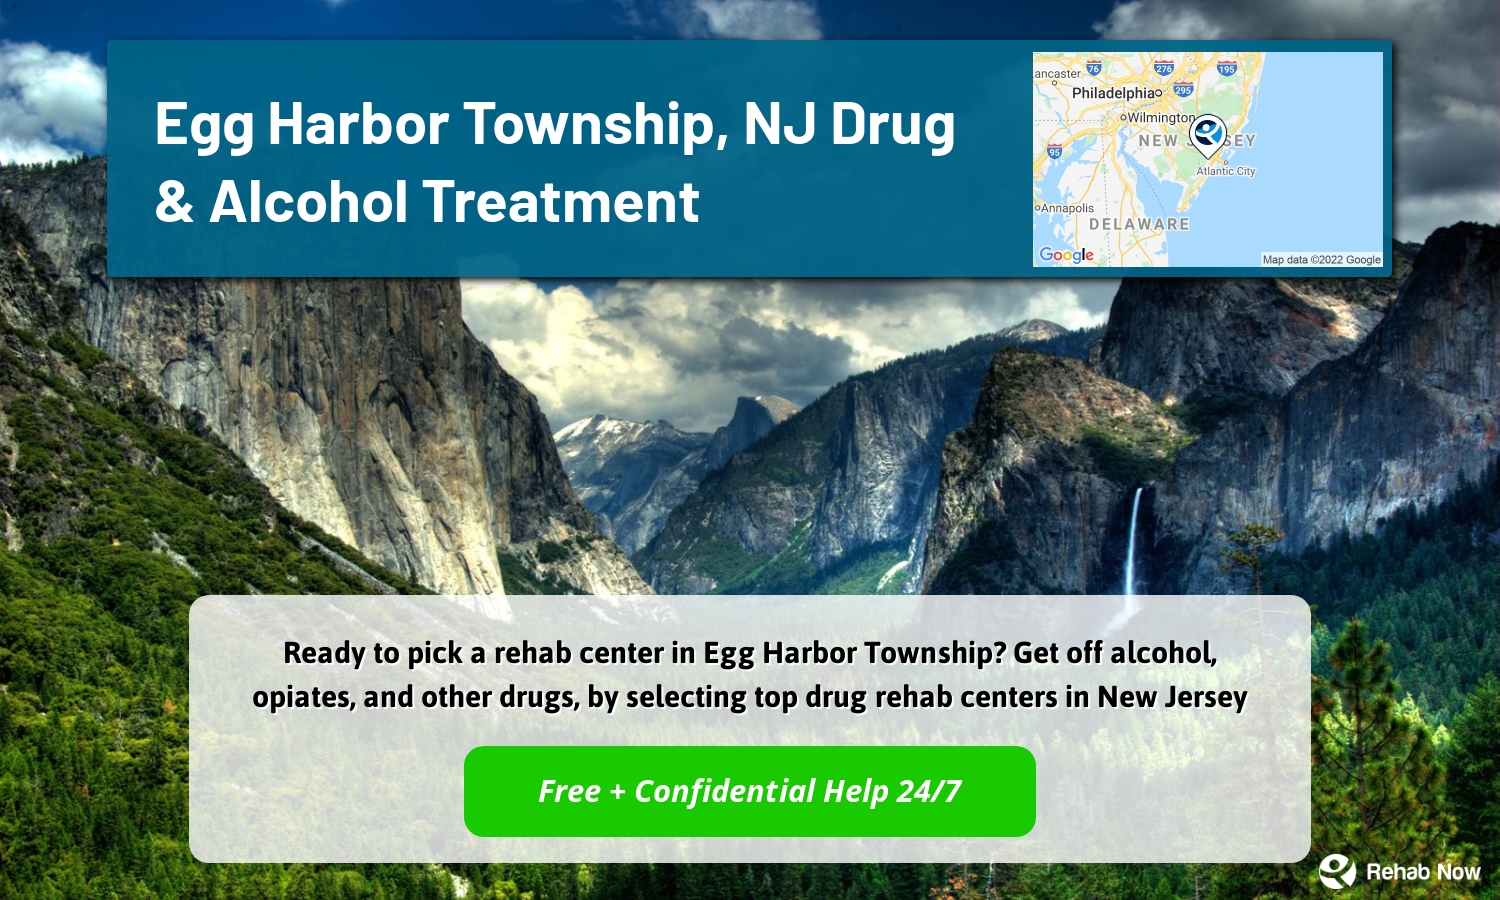 Ready to pick a rehab center in Egg Harbor Township? Get off alcohol, opiates, and other drugs, by selecting top drug rehab centers in New Jersey